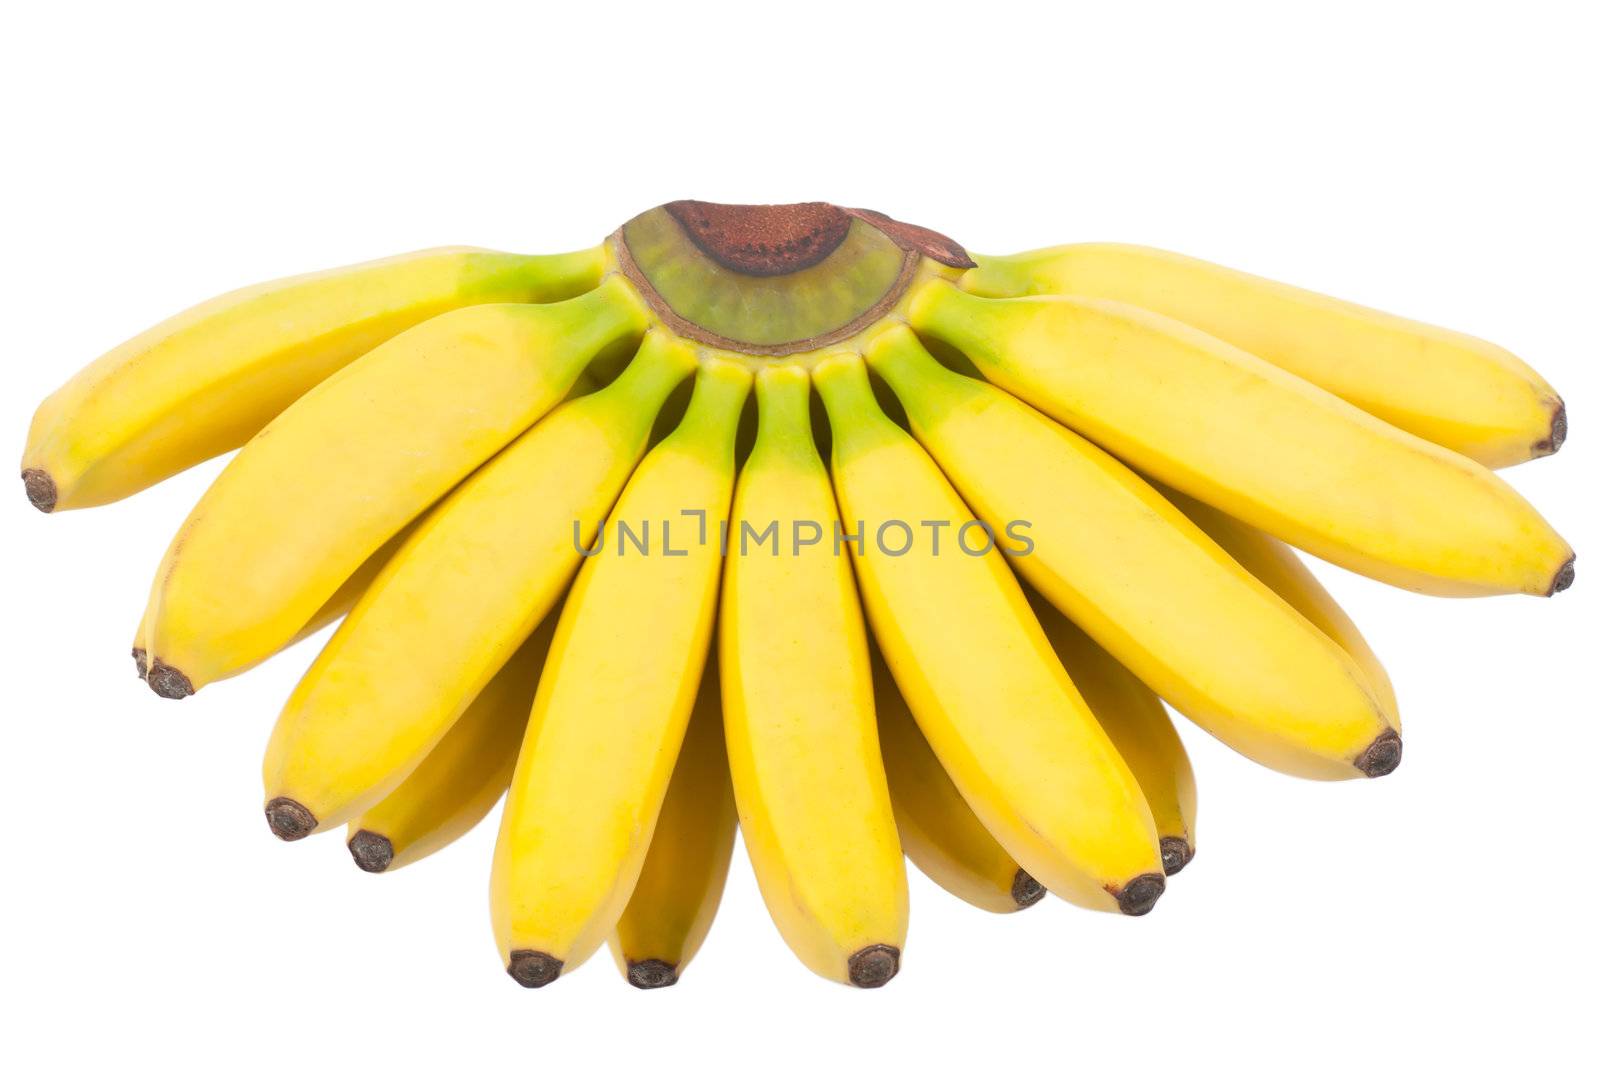 A bunch of bananas isolated over white background